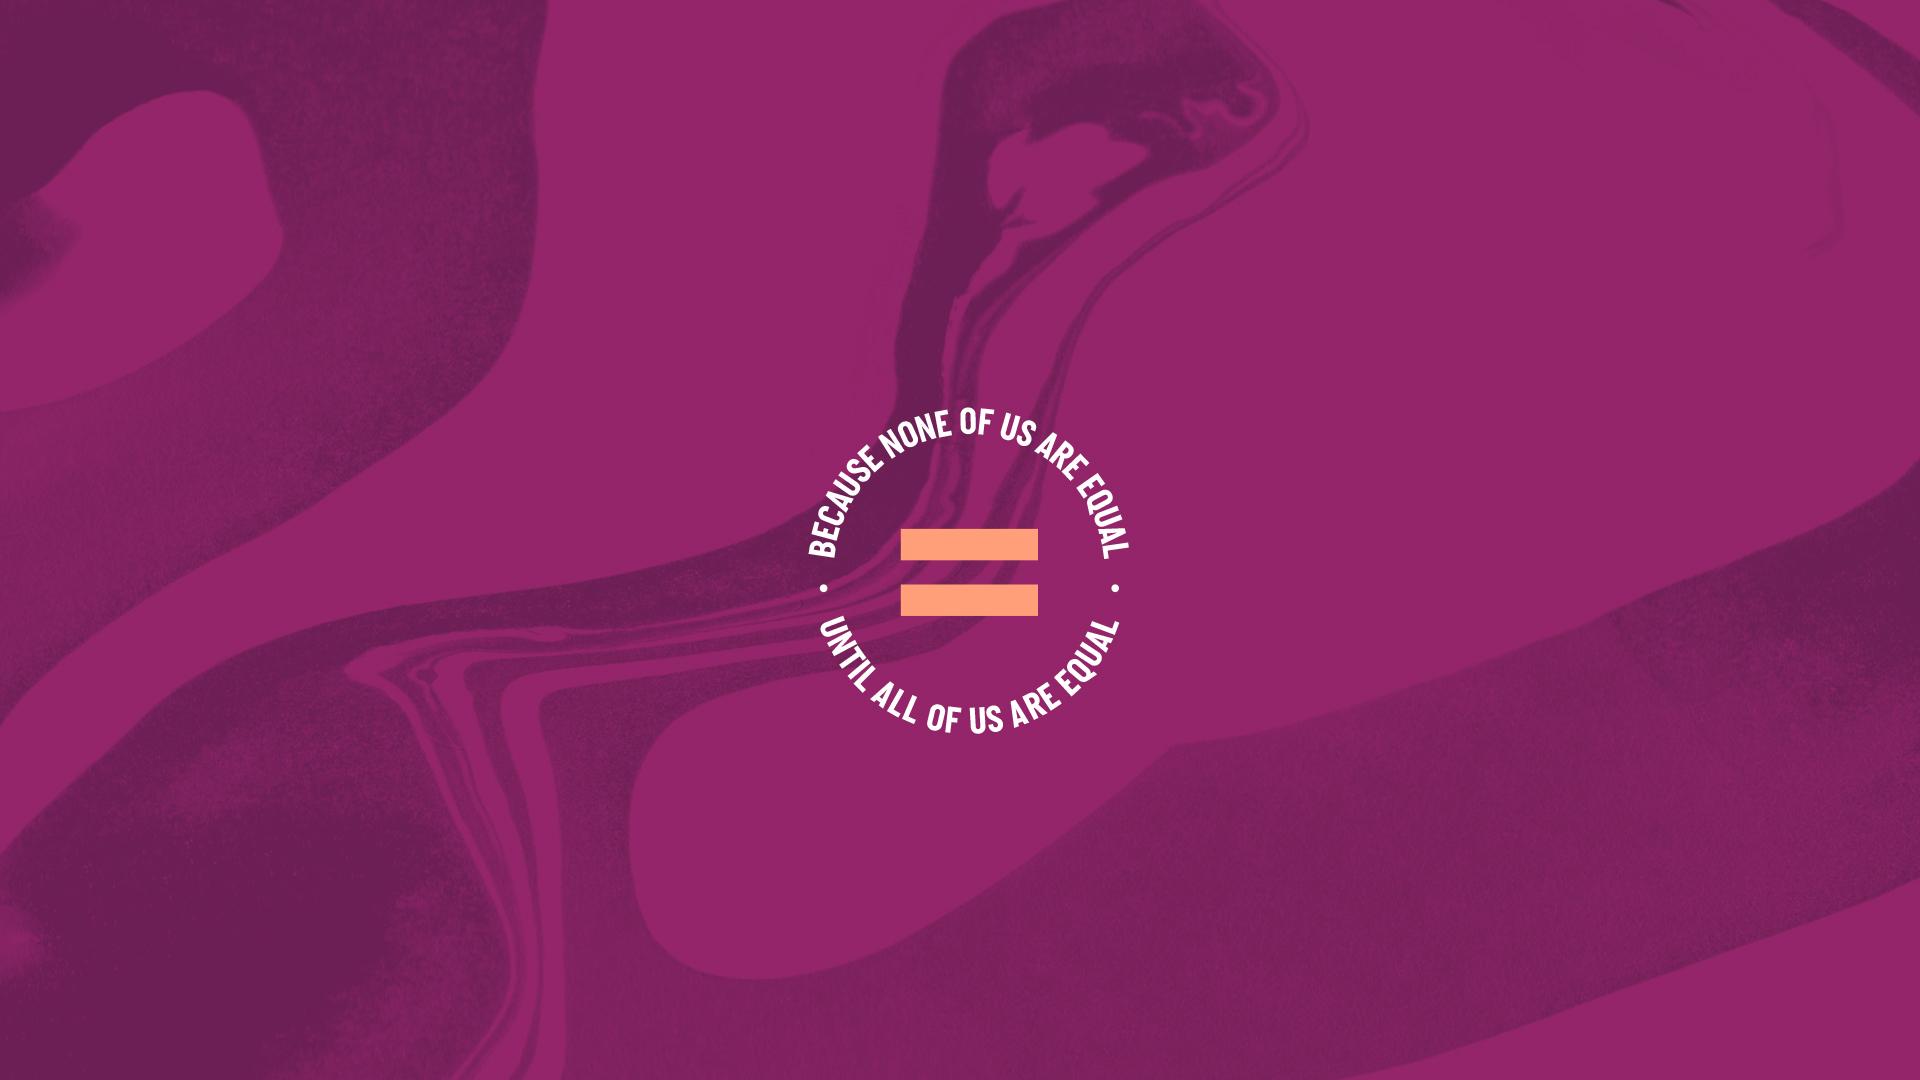 Download these exclusive gender equality wallpaper!